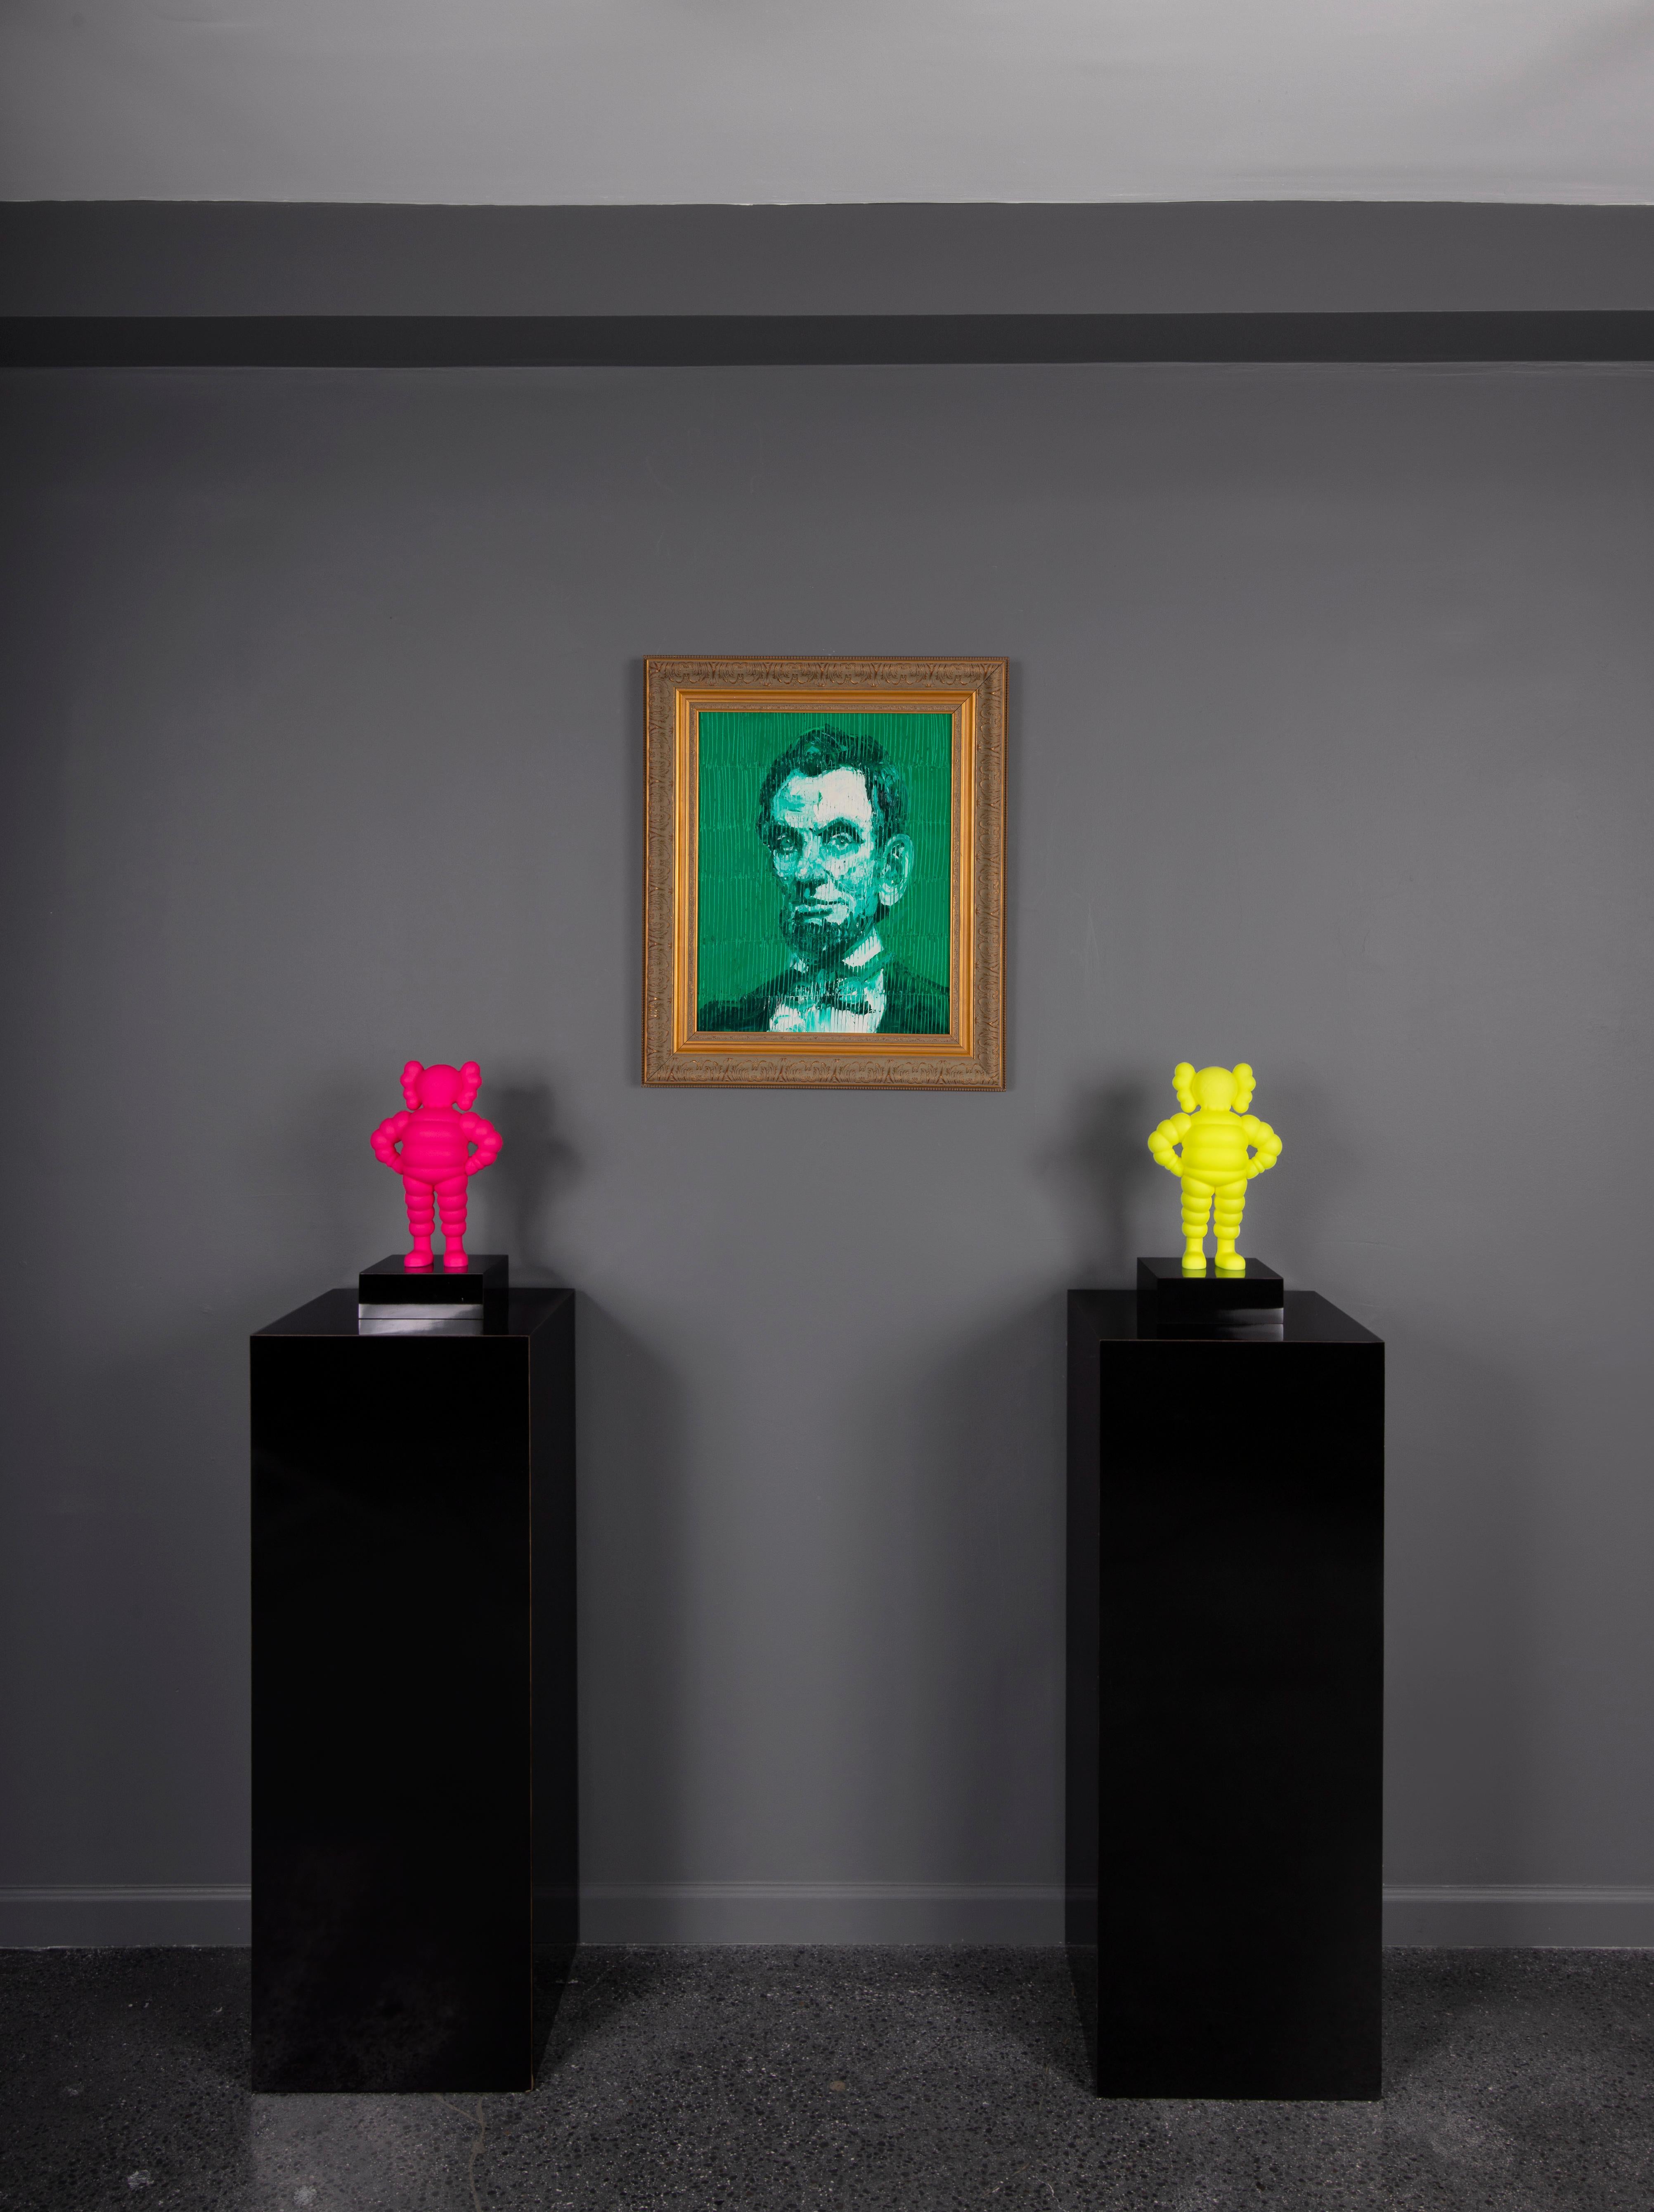 ‘Green Abraham Lincoln’ is a framed monochrome portrait of Abraham Lincoln. Slonem paints Lincoln in vibrant and thick green oil paint. He then goes back to the portrait with the end of his paintbrush, creating a geometric grid-like pattern that